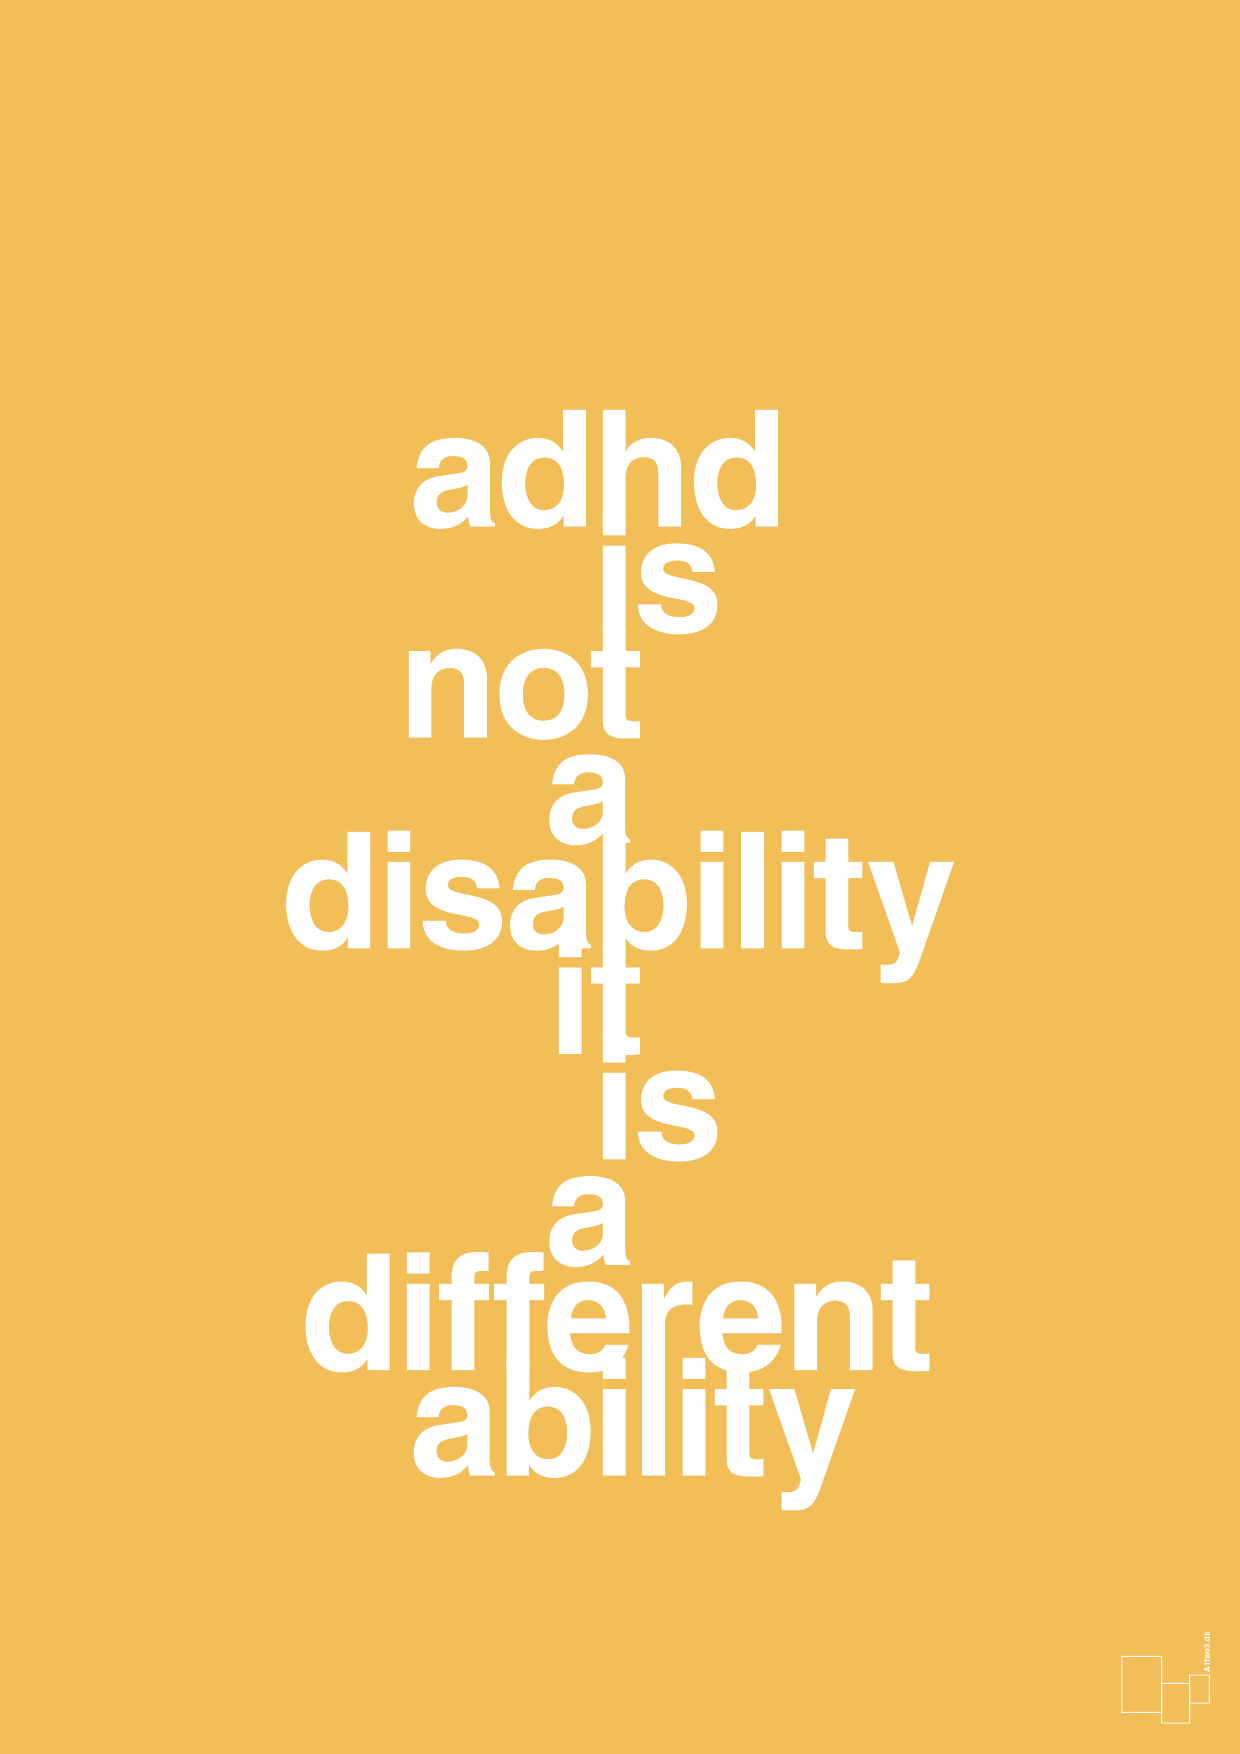 adhd is not a disability it is a different ability - Plakat med Samfund i Honeycomb